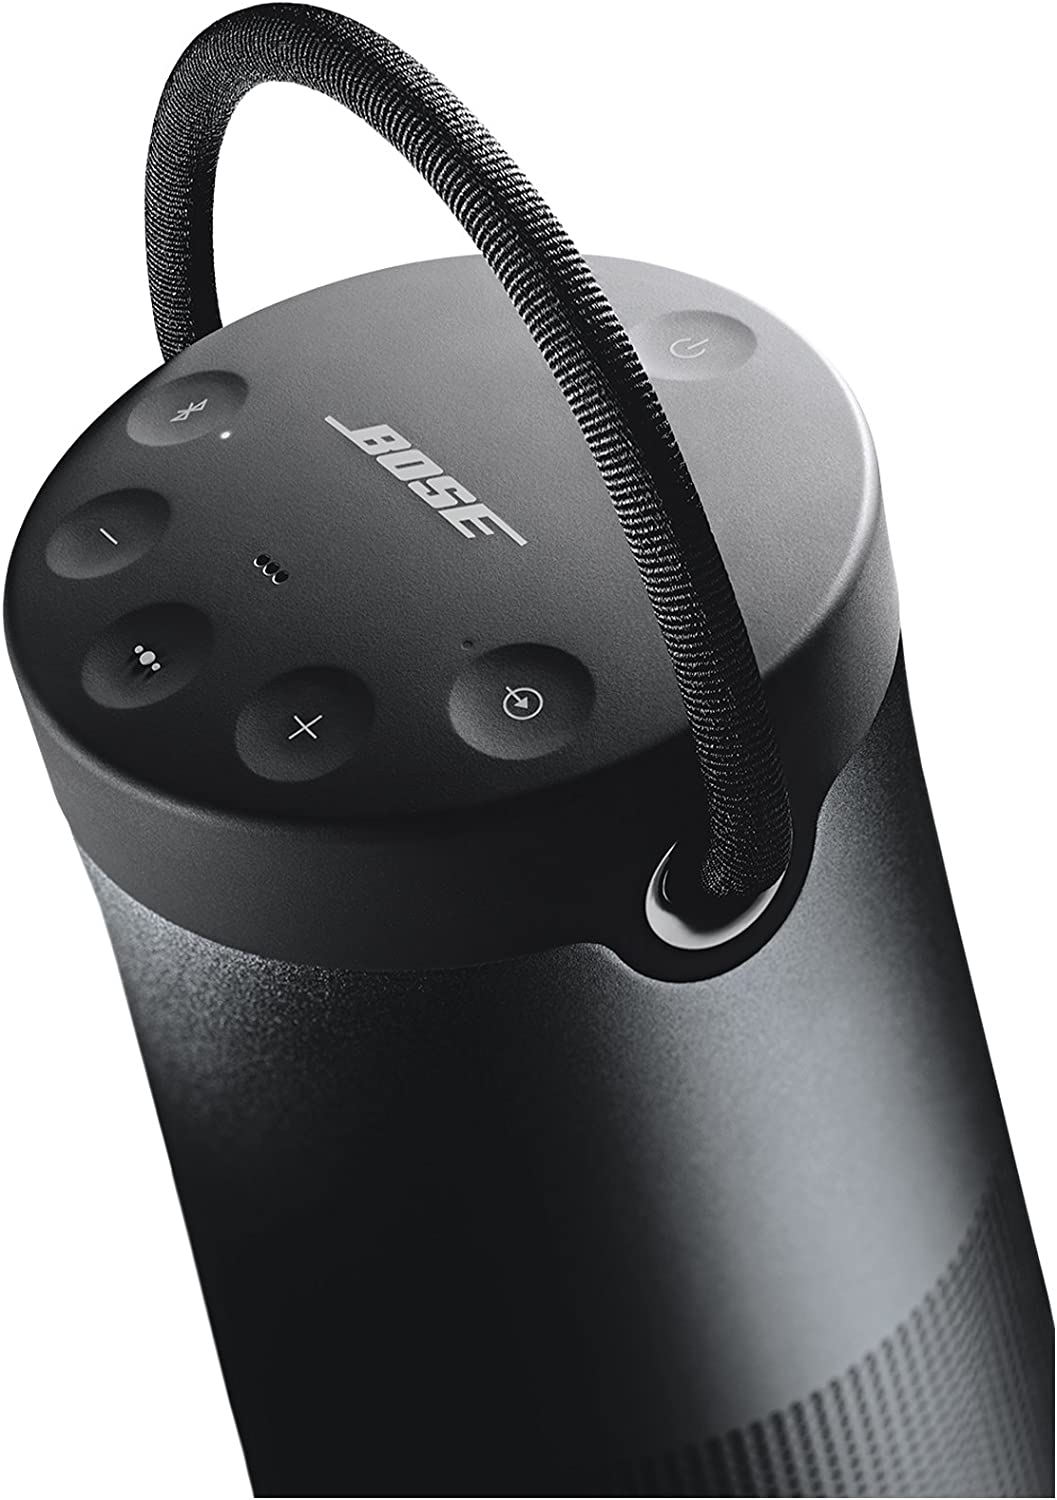 Bose Soundlink Revolve Plus: Features, Reviews, and Price - Techidence